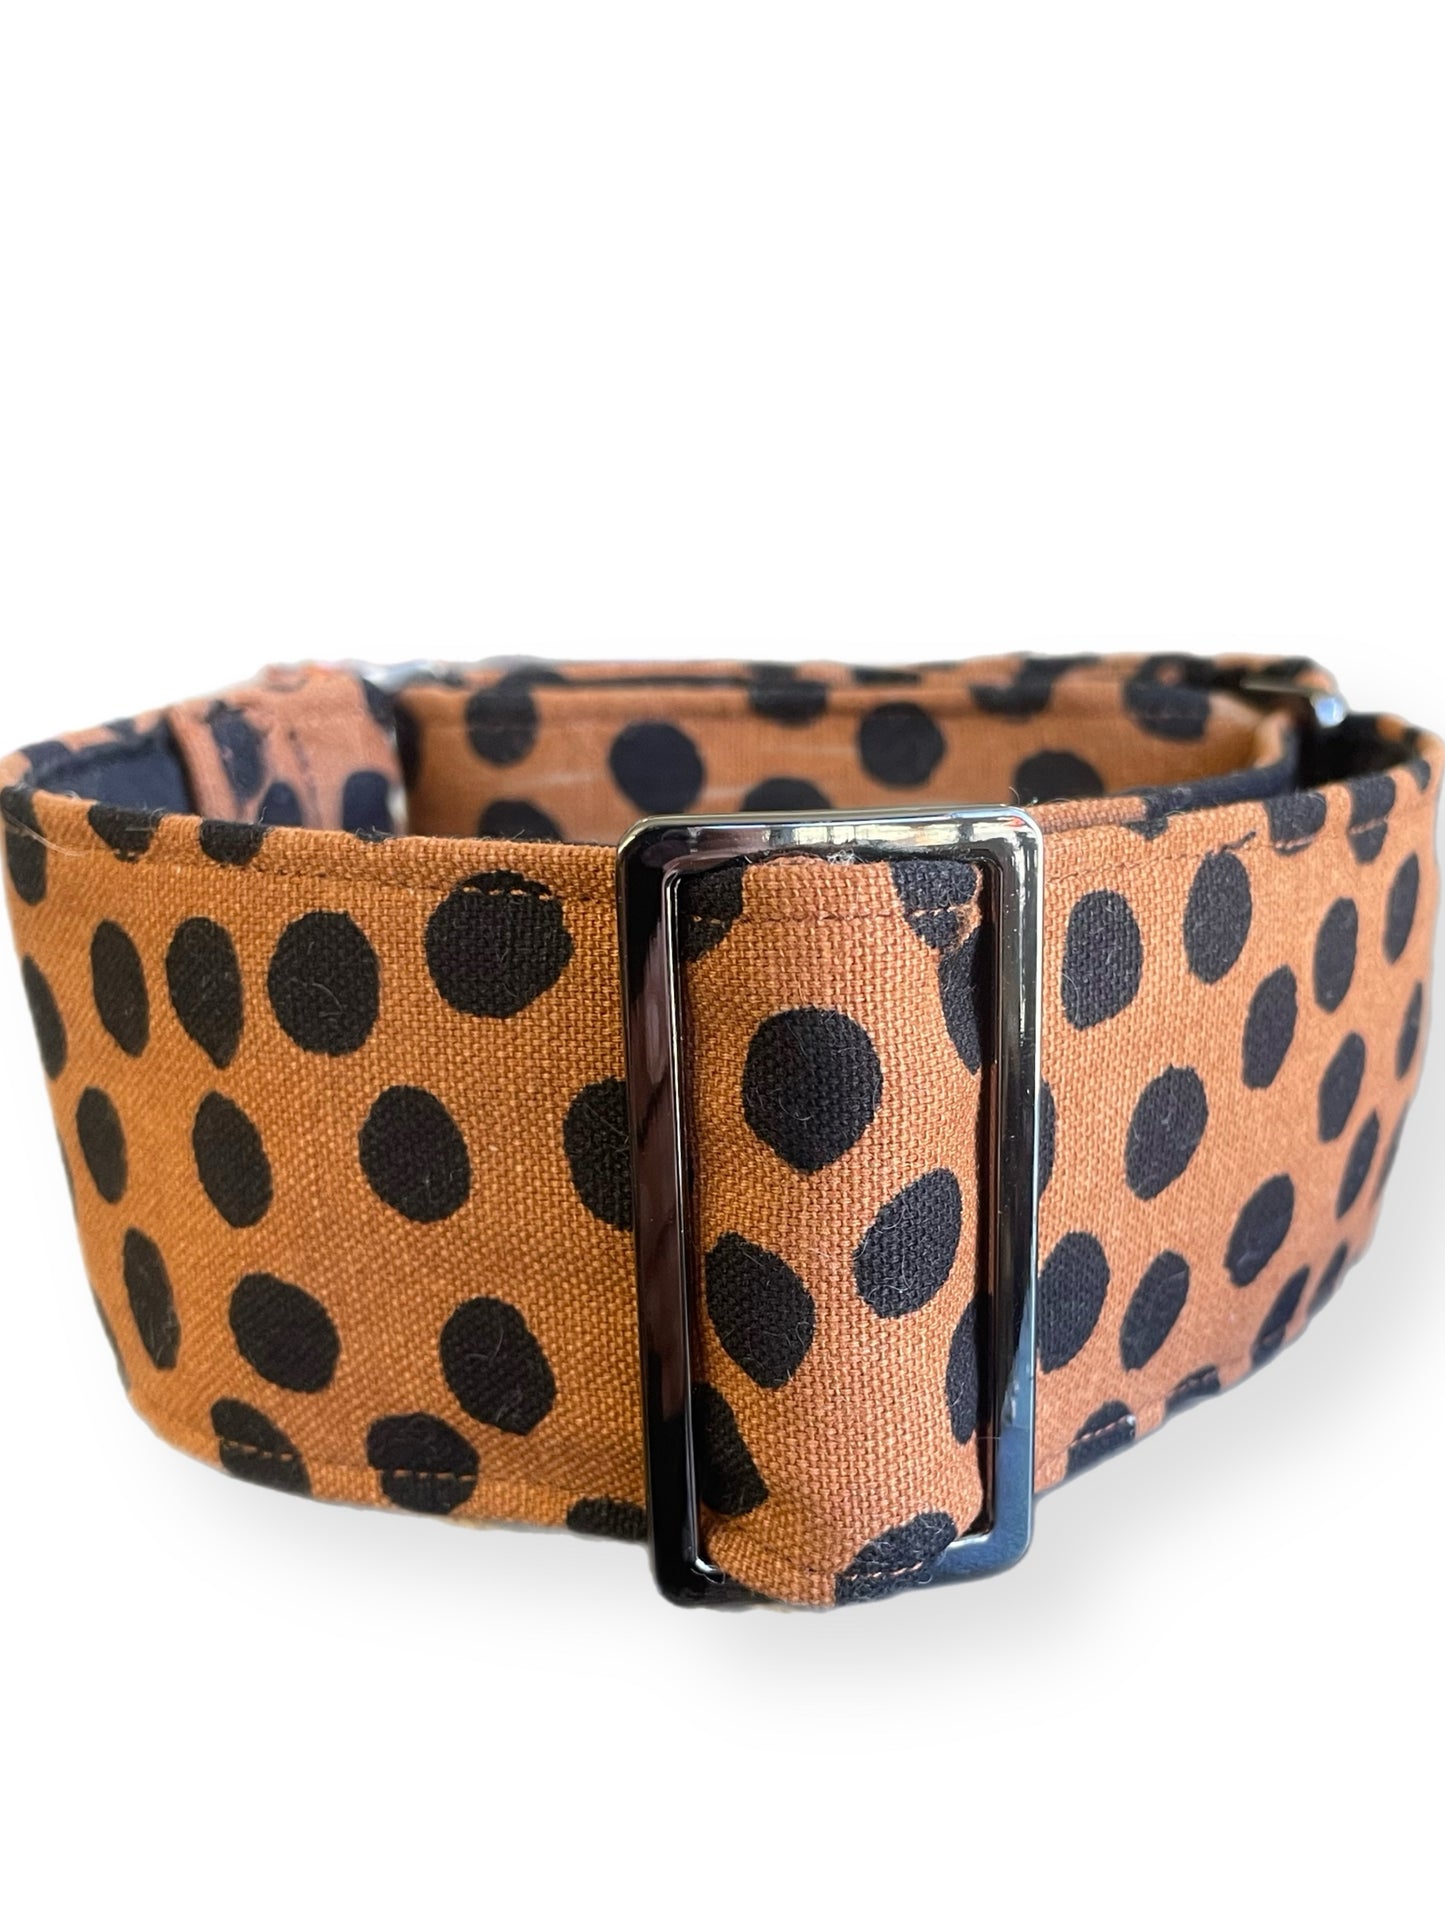 Terracotta with spots greyhound Martingale collar cotton covered wide